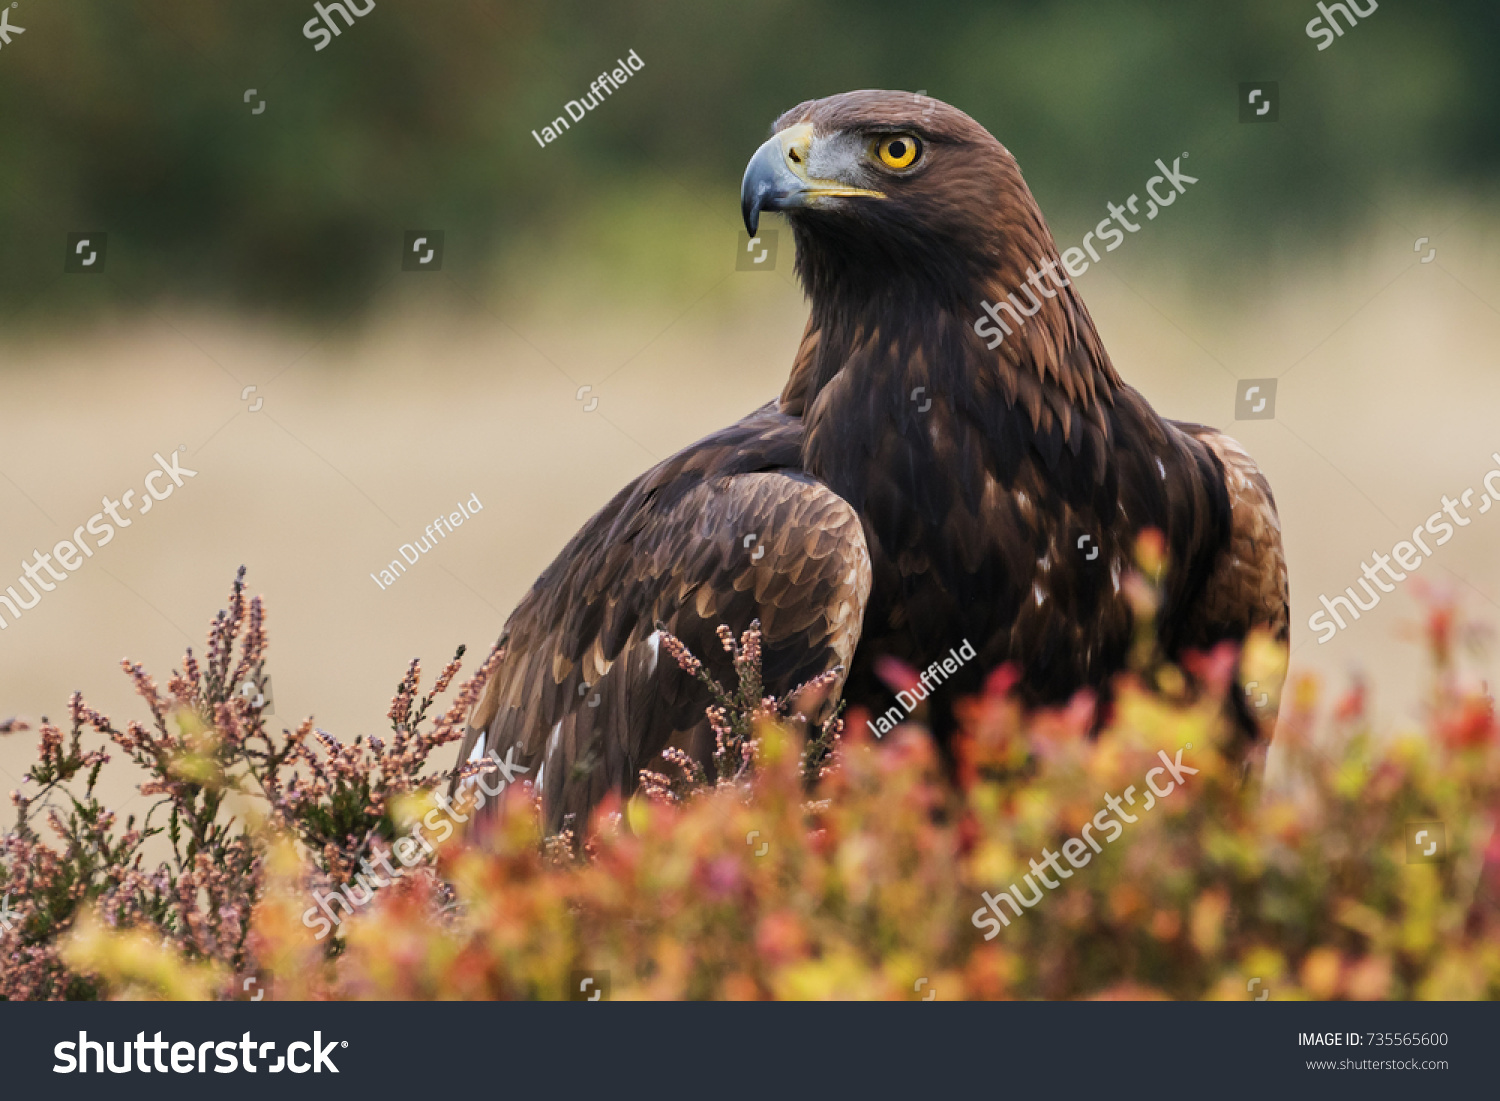 Golden eagle looking around. A majestic golden eagle takes in its surroundings from its spot amongst moorland vegetation. #735565600